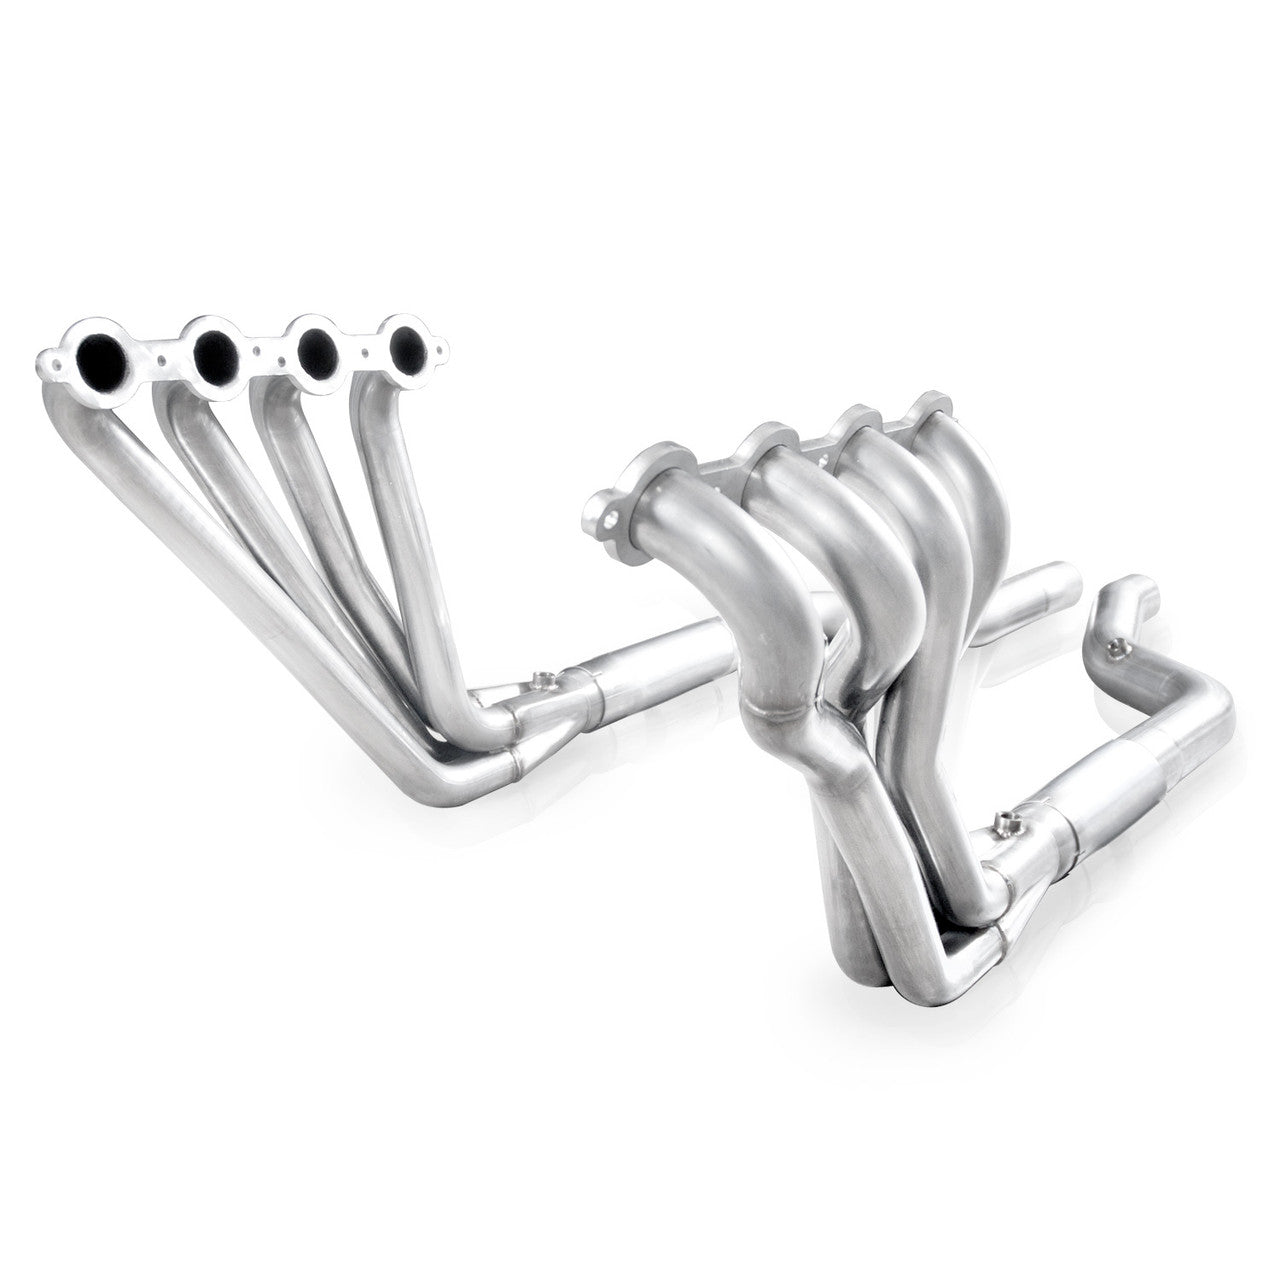 Stainless Power 2010-15 Camaro 6.2L Headers 1-7/8in Primaries 3in Collectors High-Flow Cats Factory